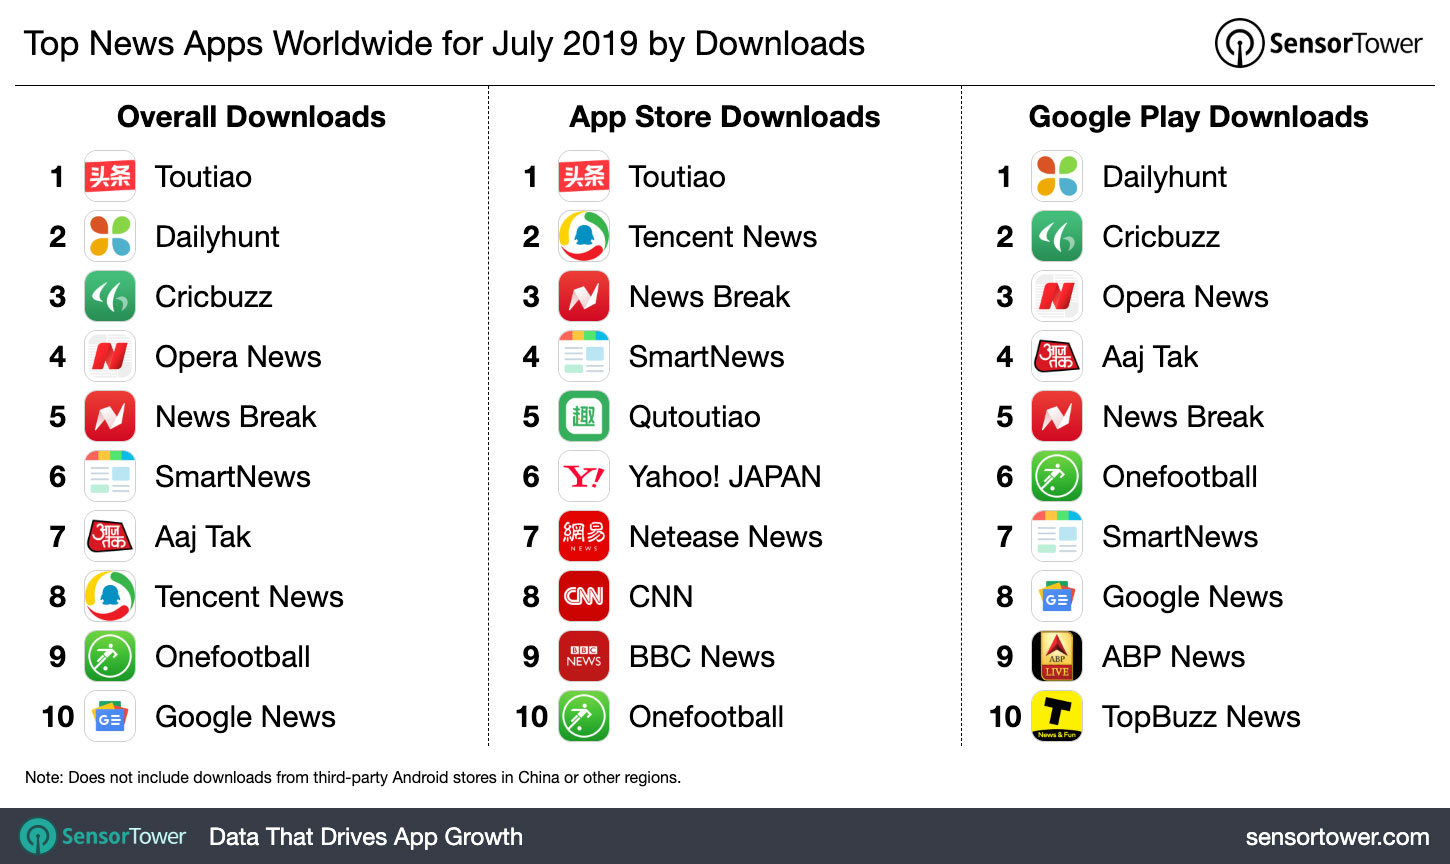 Top News Apps Worldwide for July 2019 by Downloads